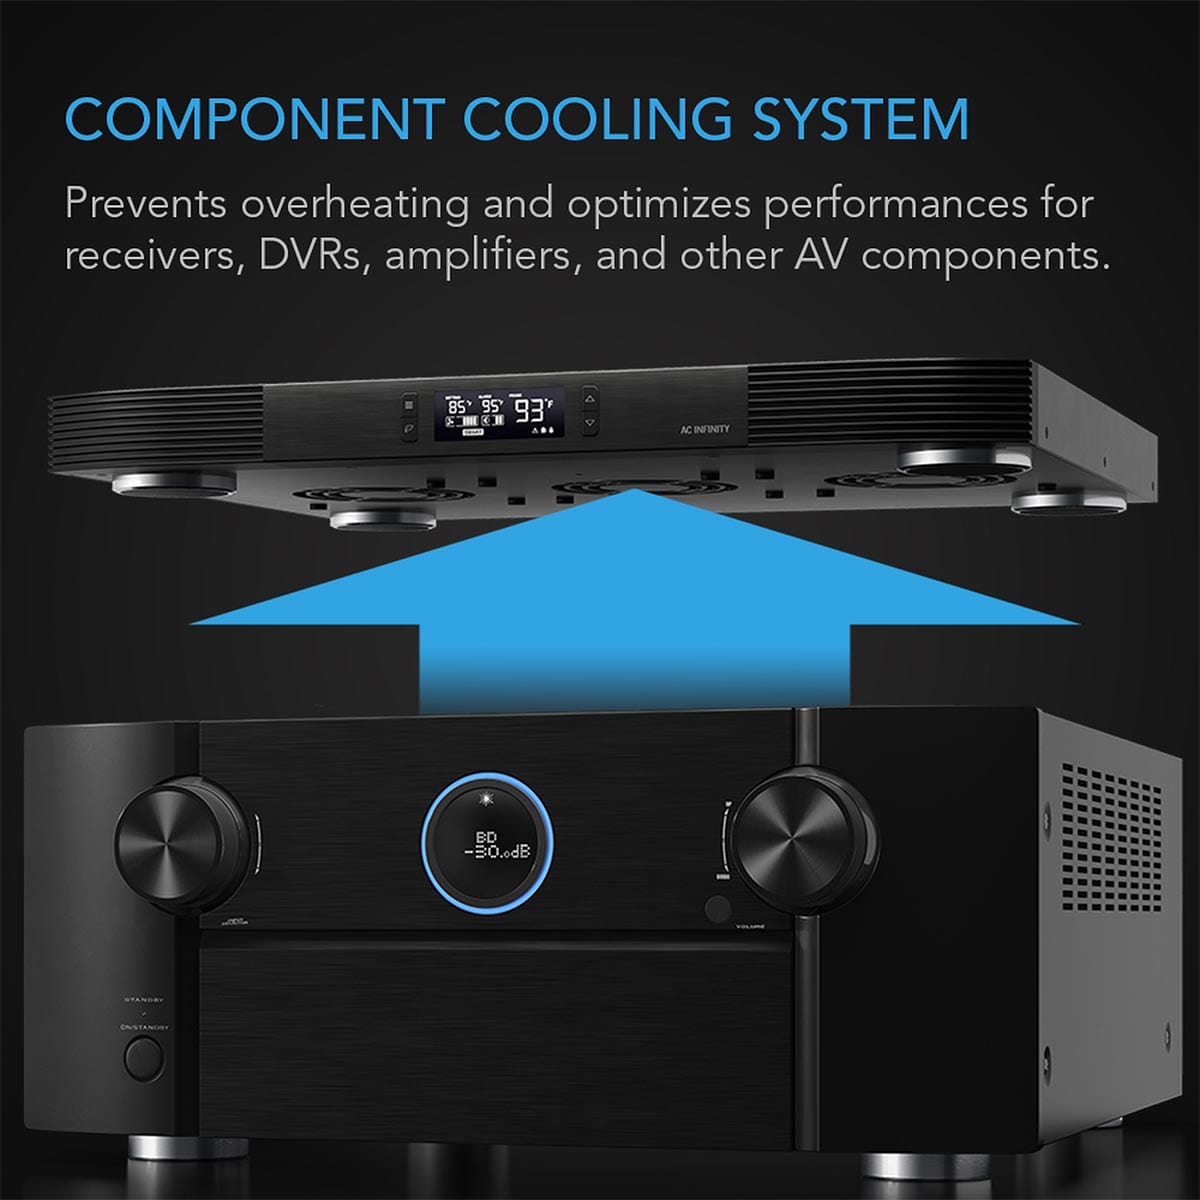 AC Infinity AC Infinity AIRCOM T9 PRO AV Component Cooling System - Top Exhaust Component Cooling